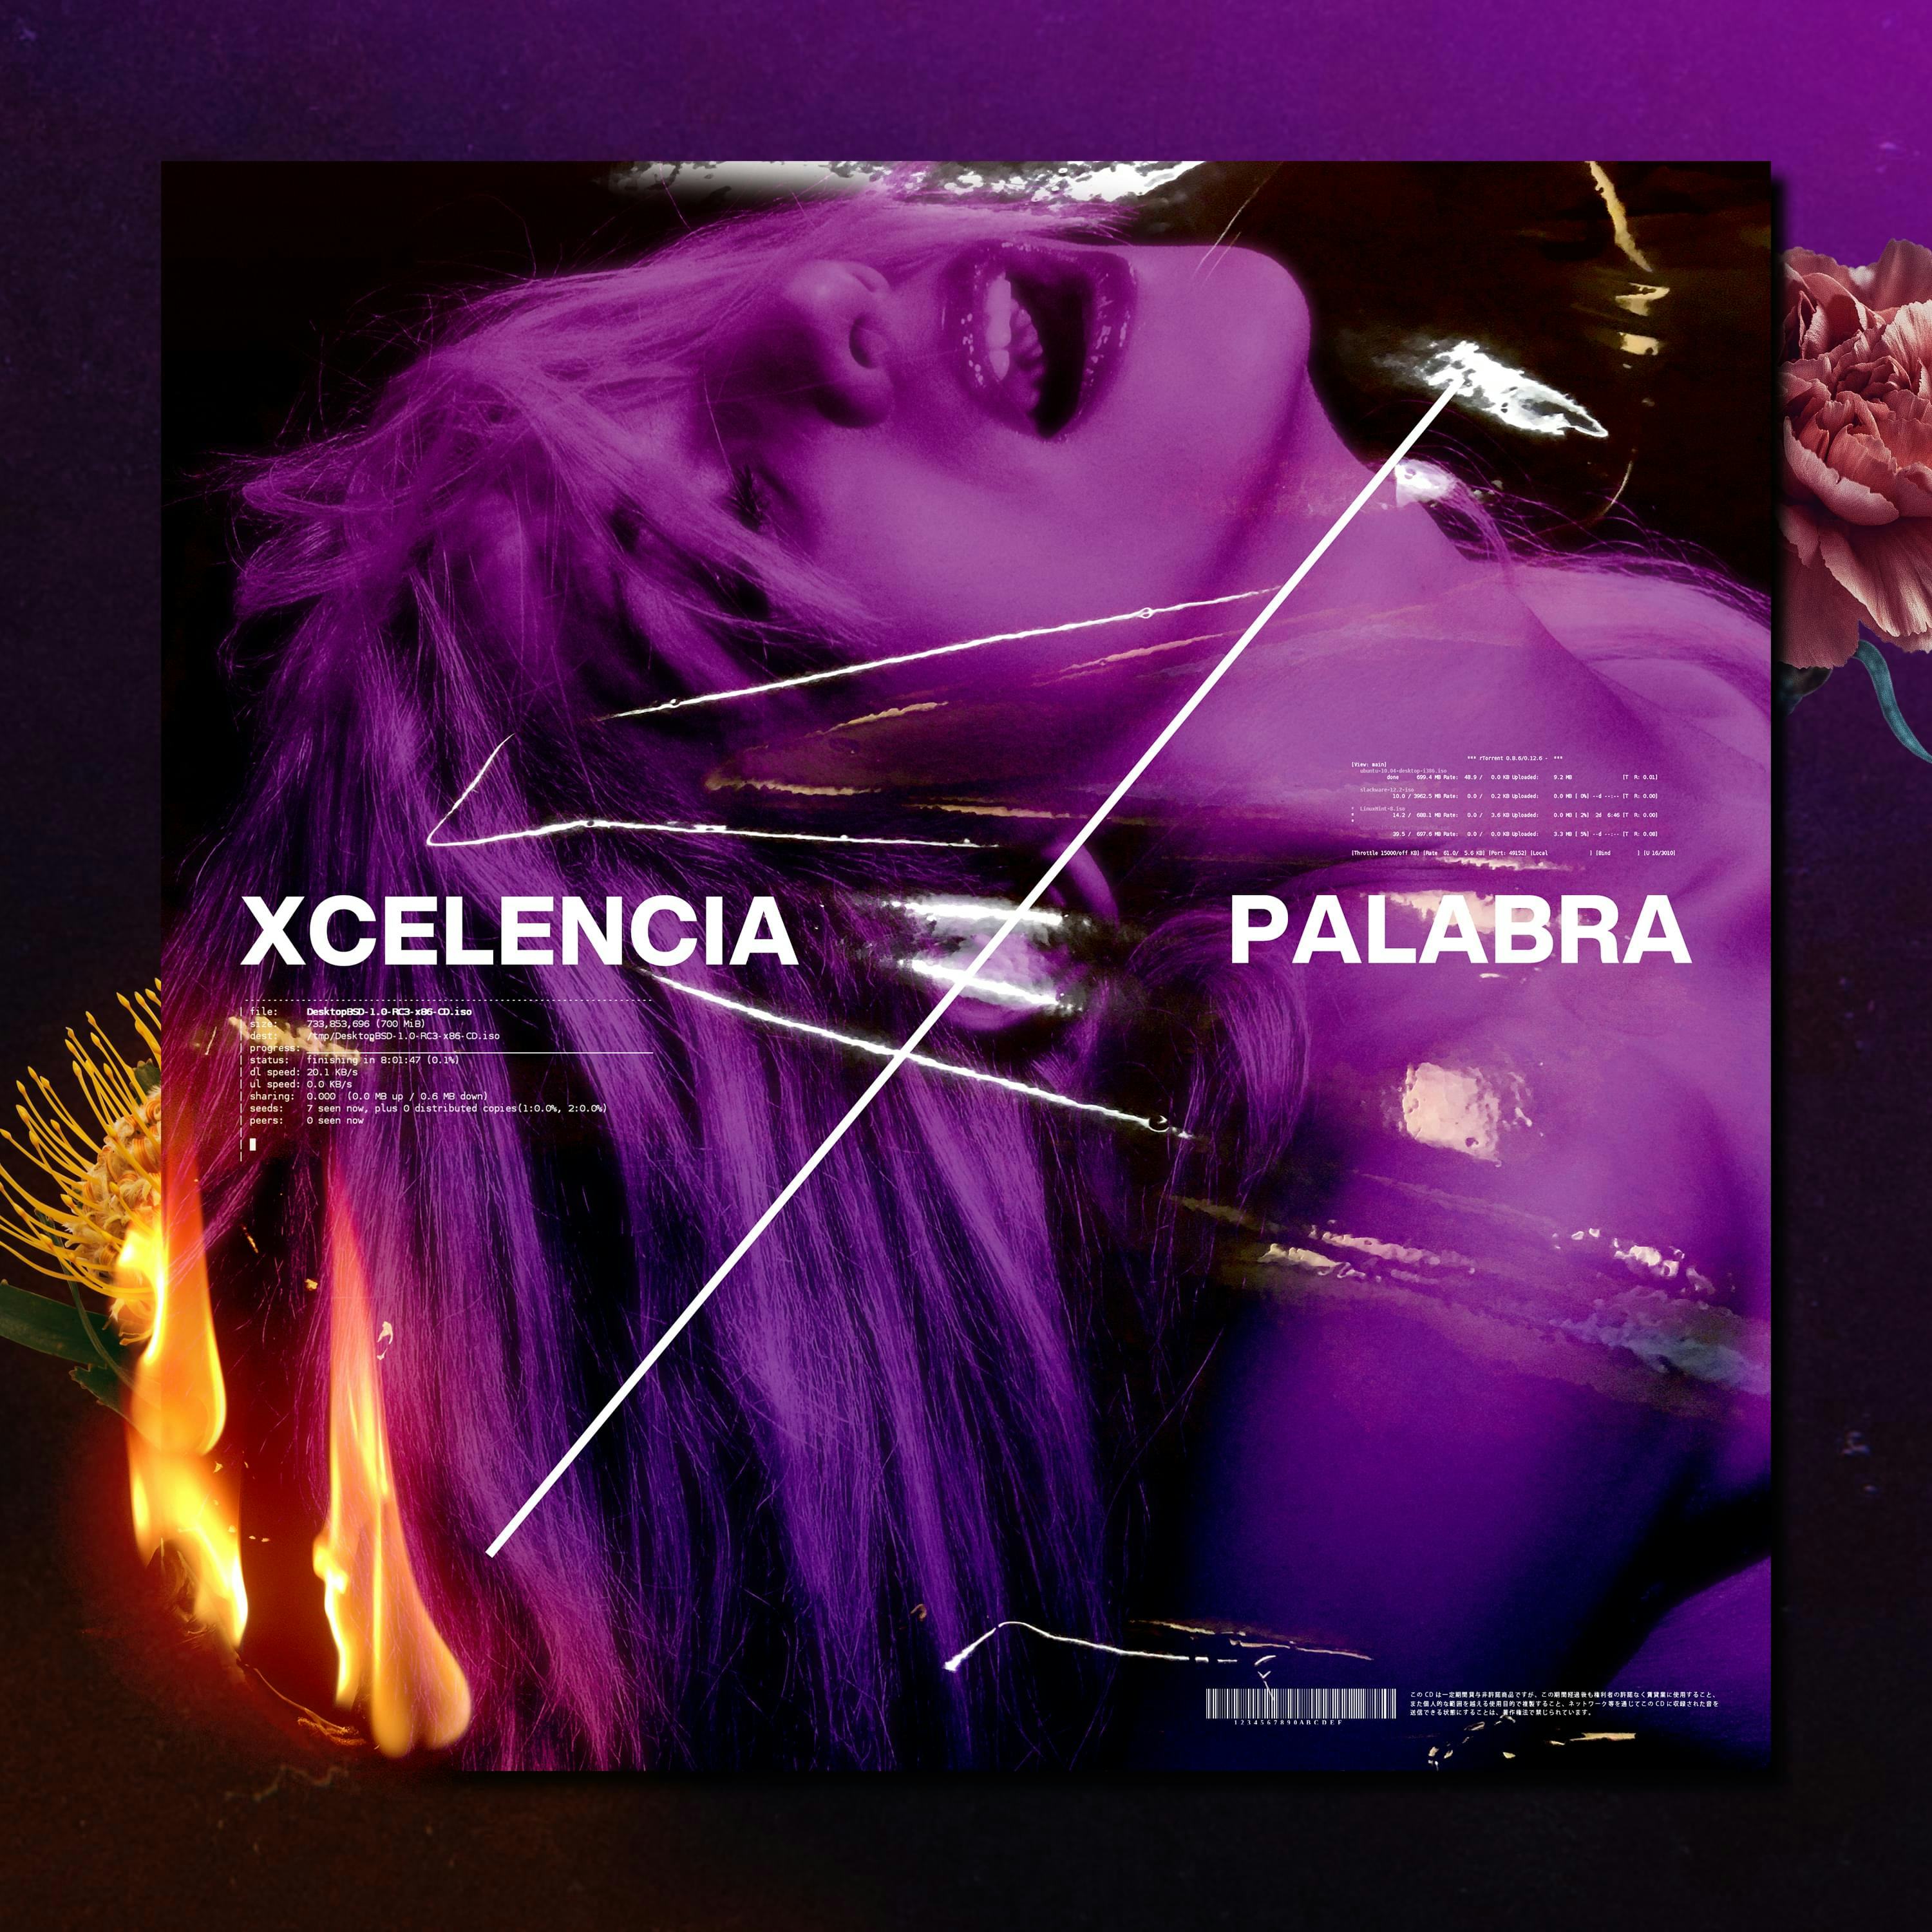 Cover art for PALABRA by Xcelencia